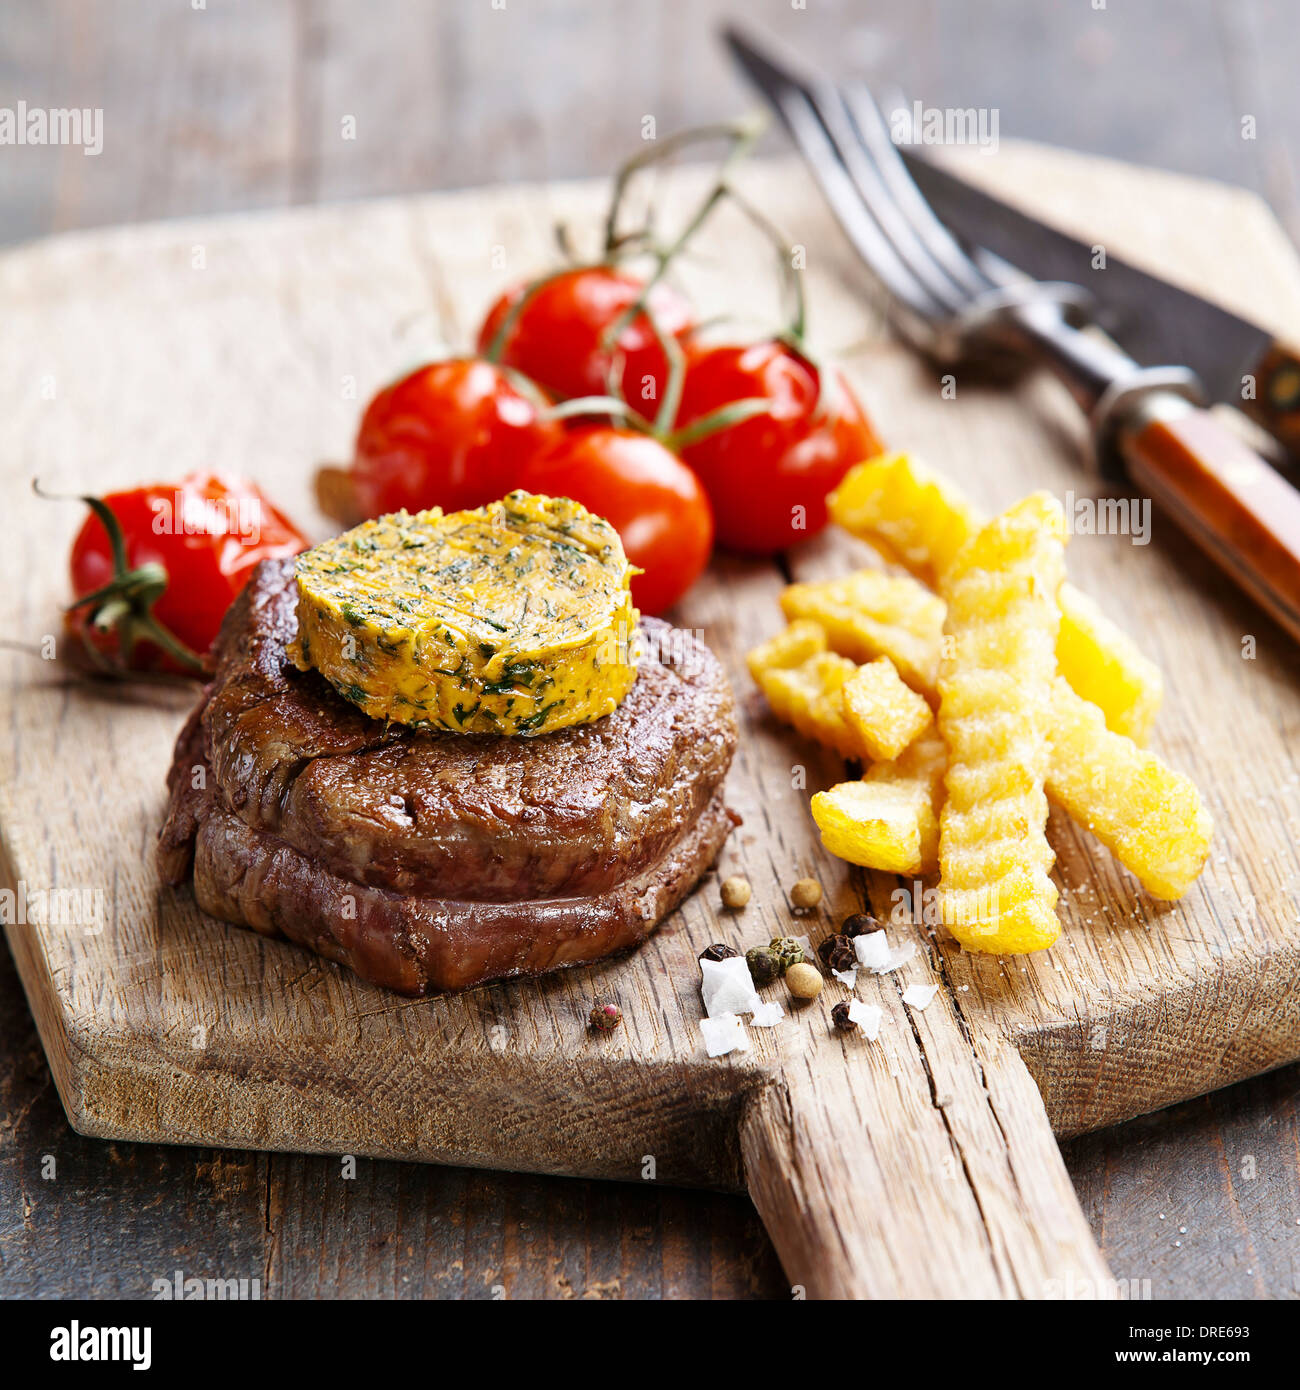 Beef Steak with Butter and Baked tomato Stock Photo